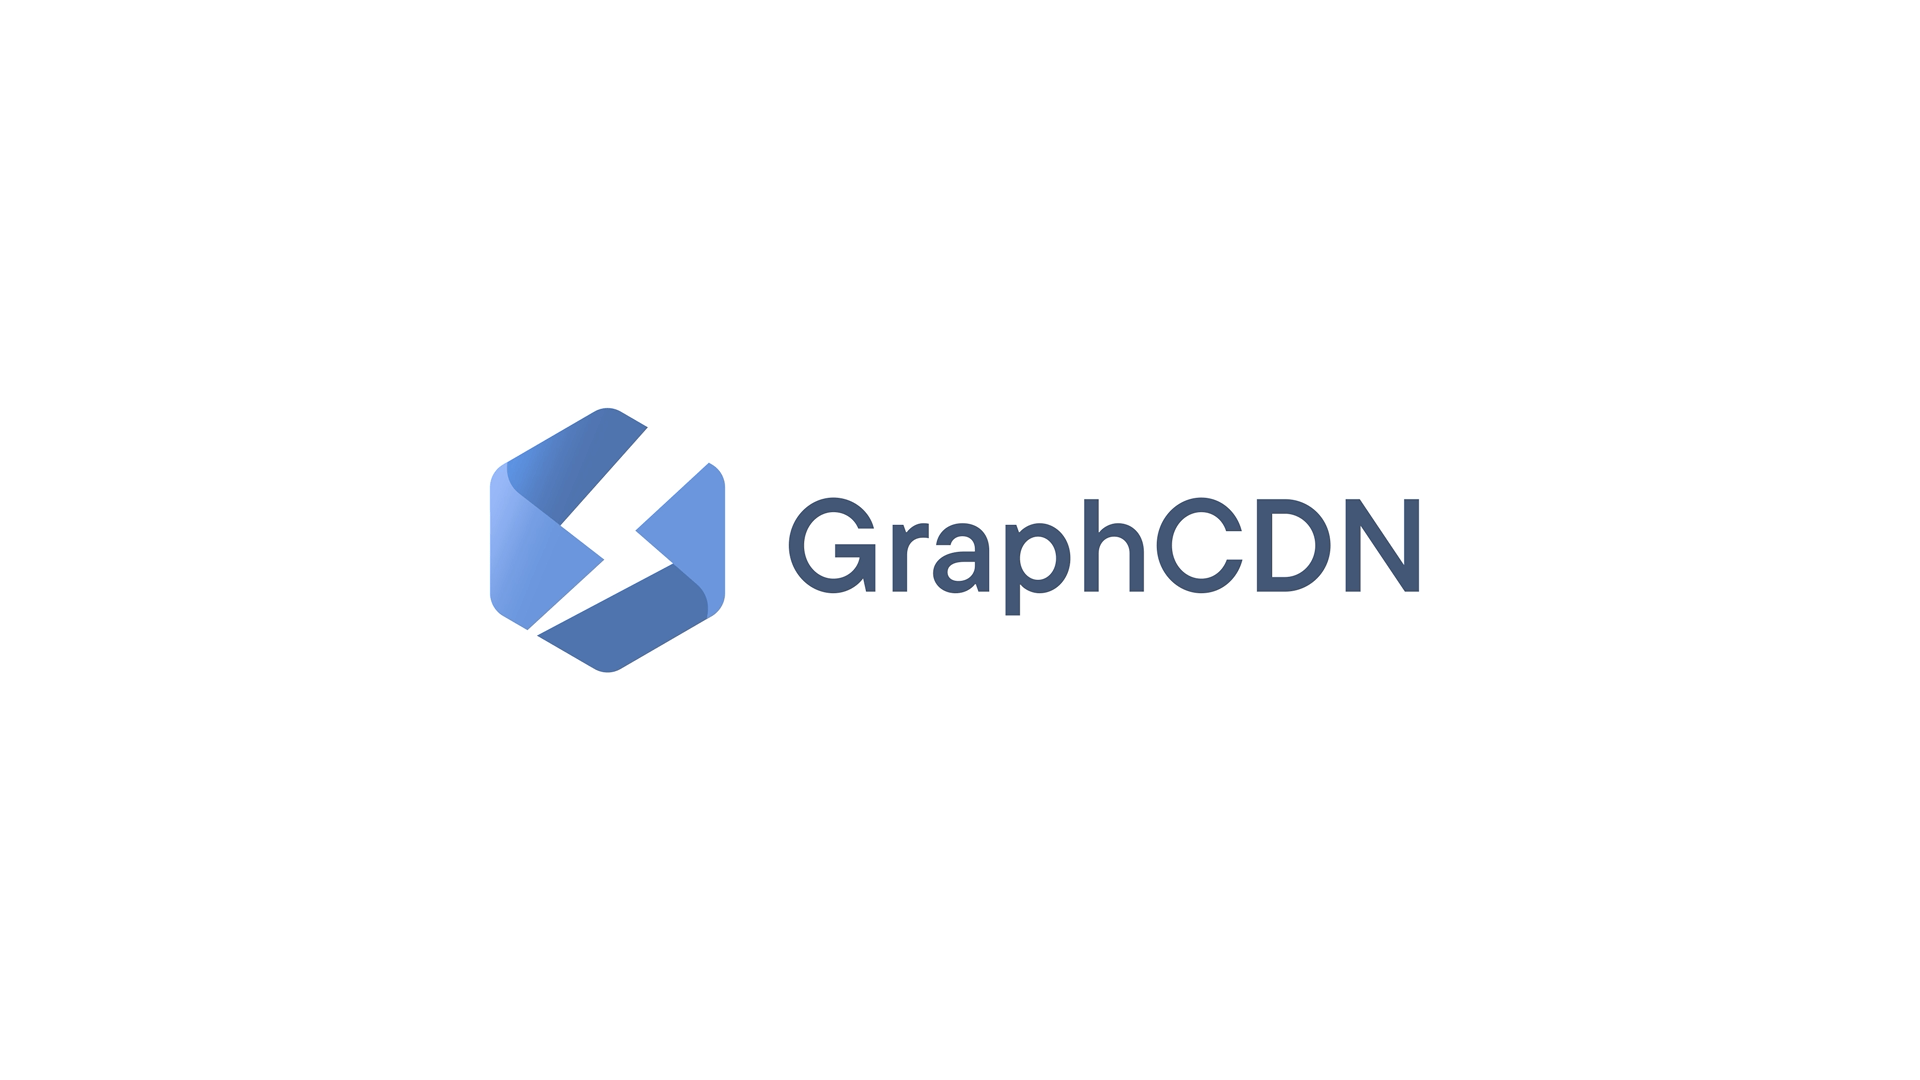 GraphCDN is now Stellate